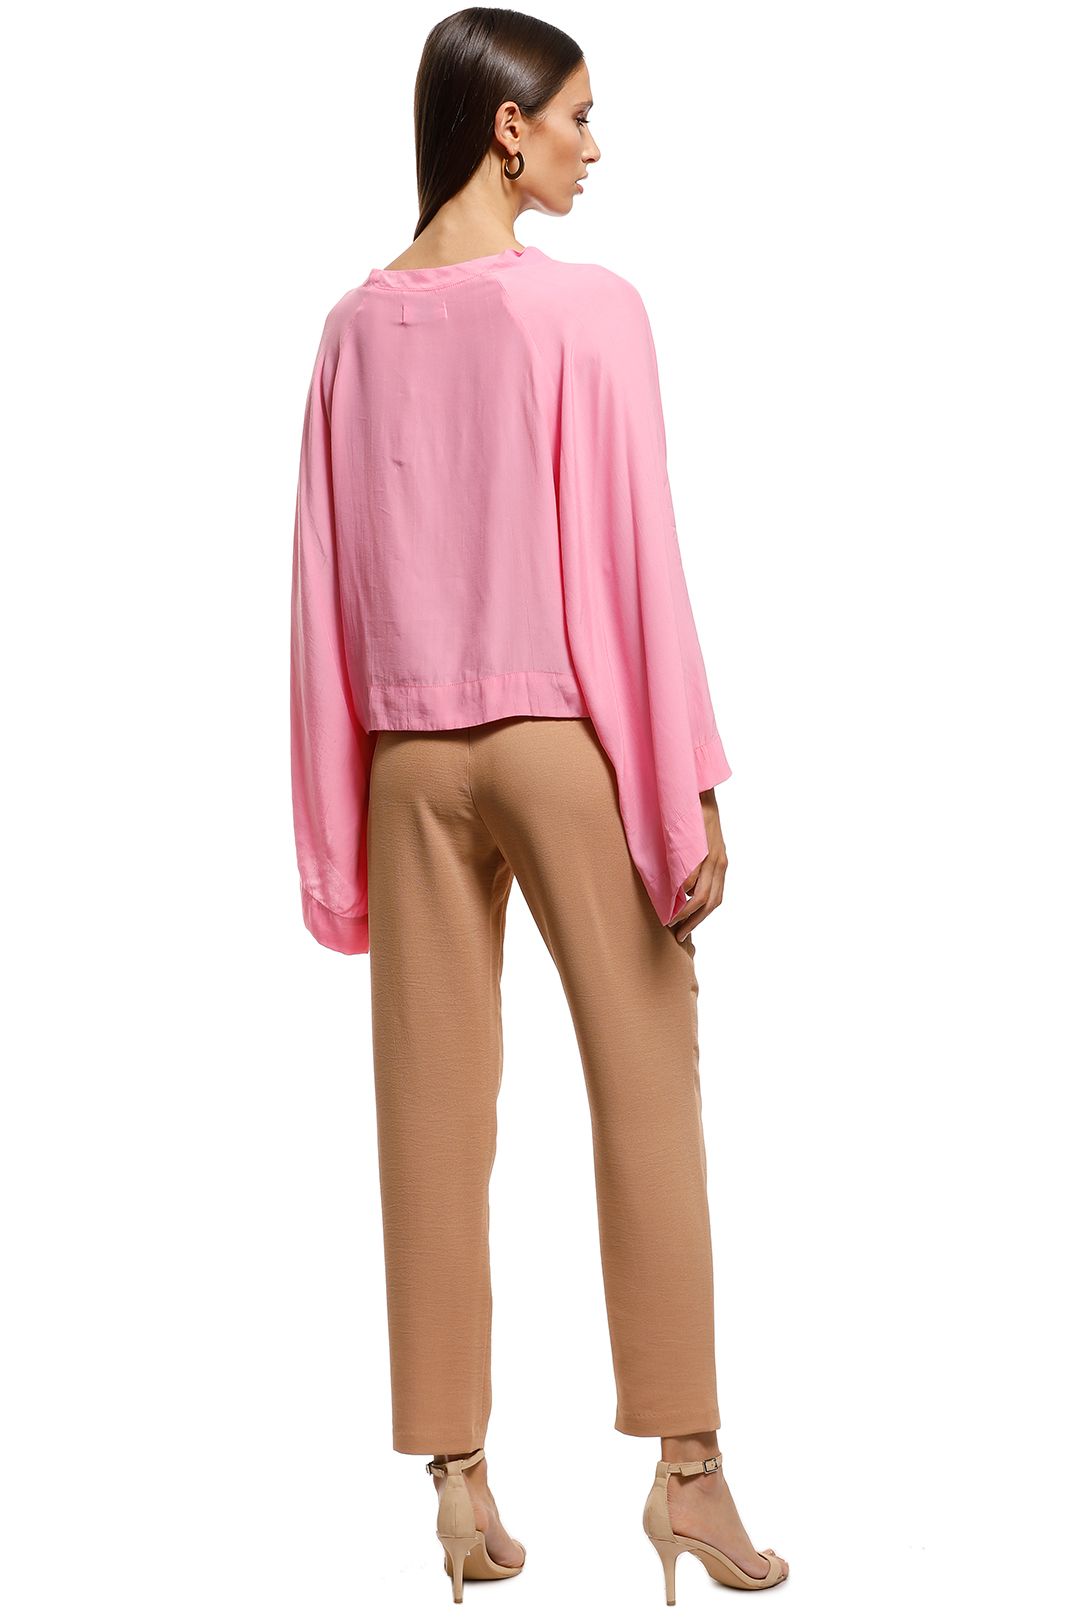 S/W/F - Flick Top - Pink - Back